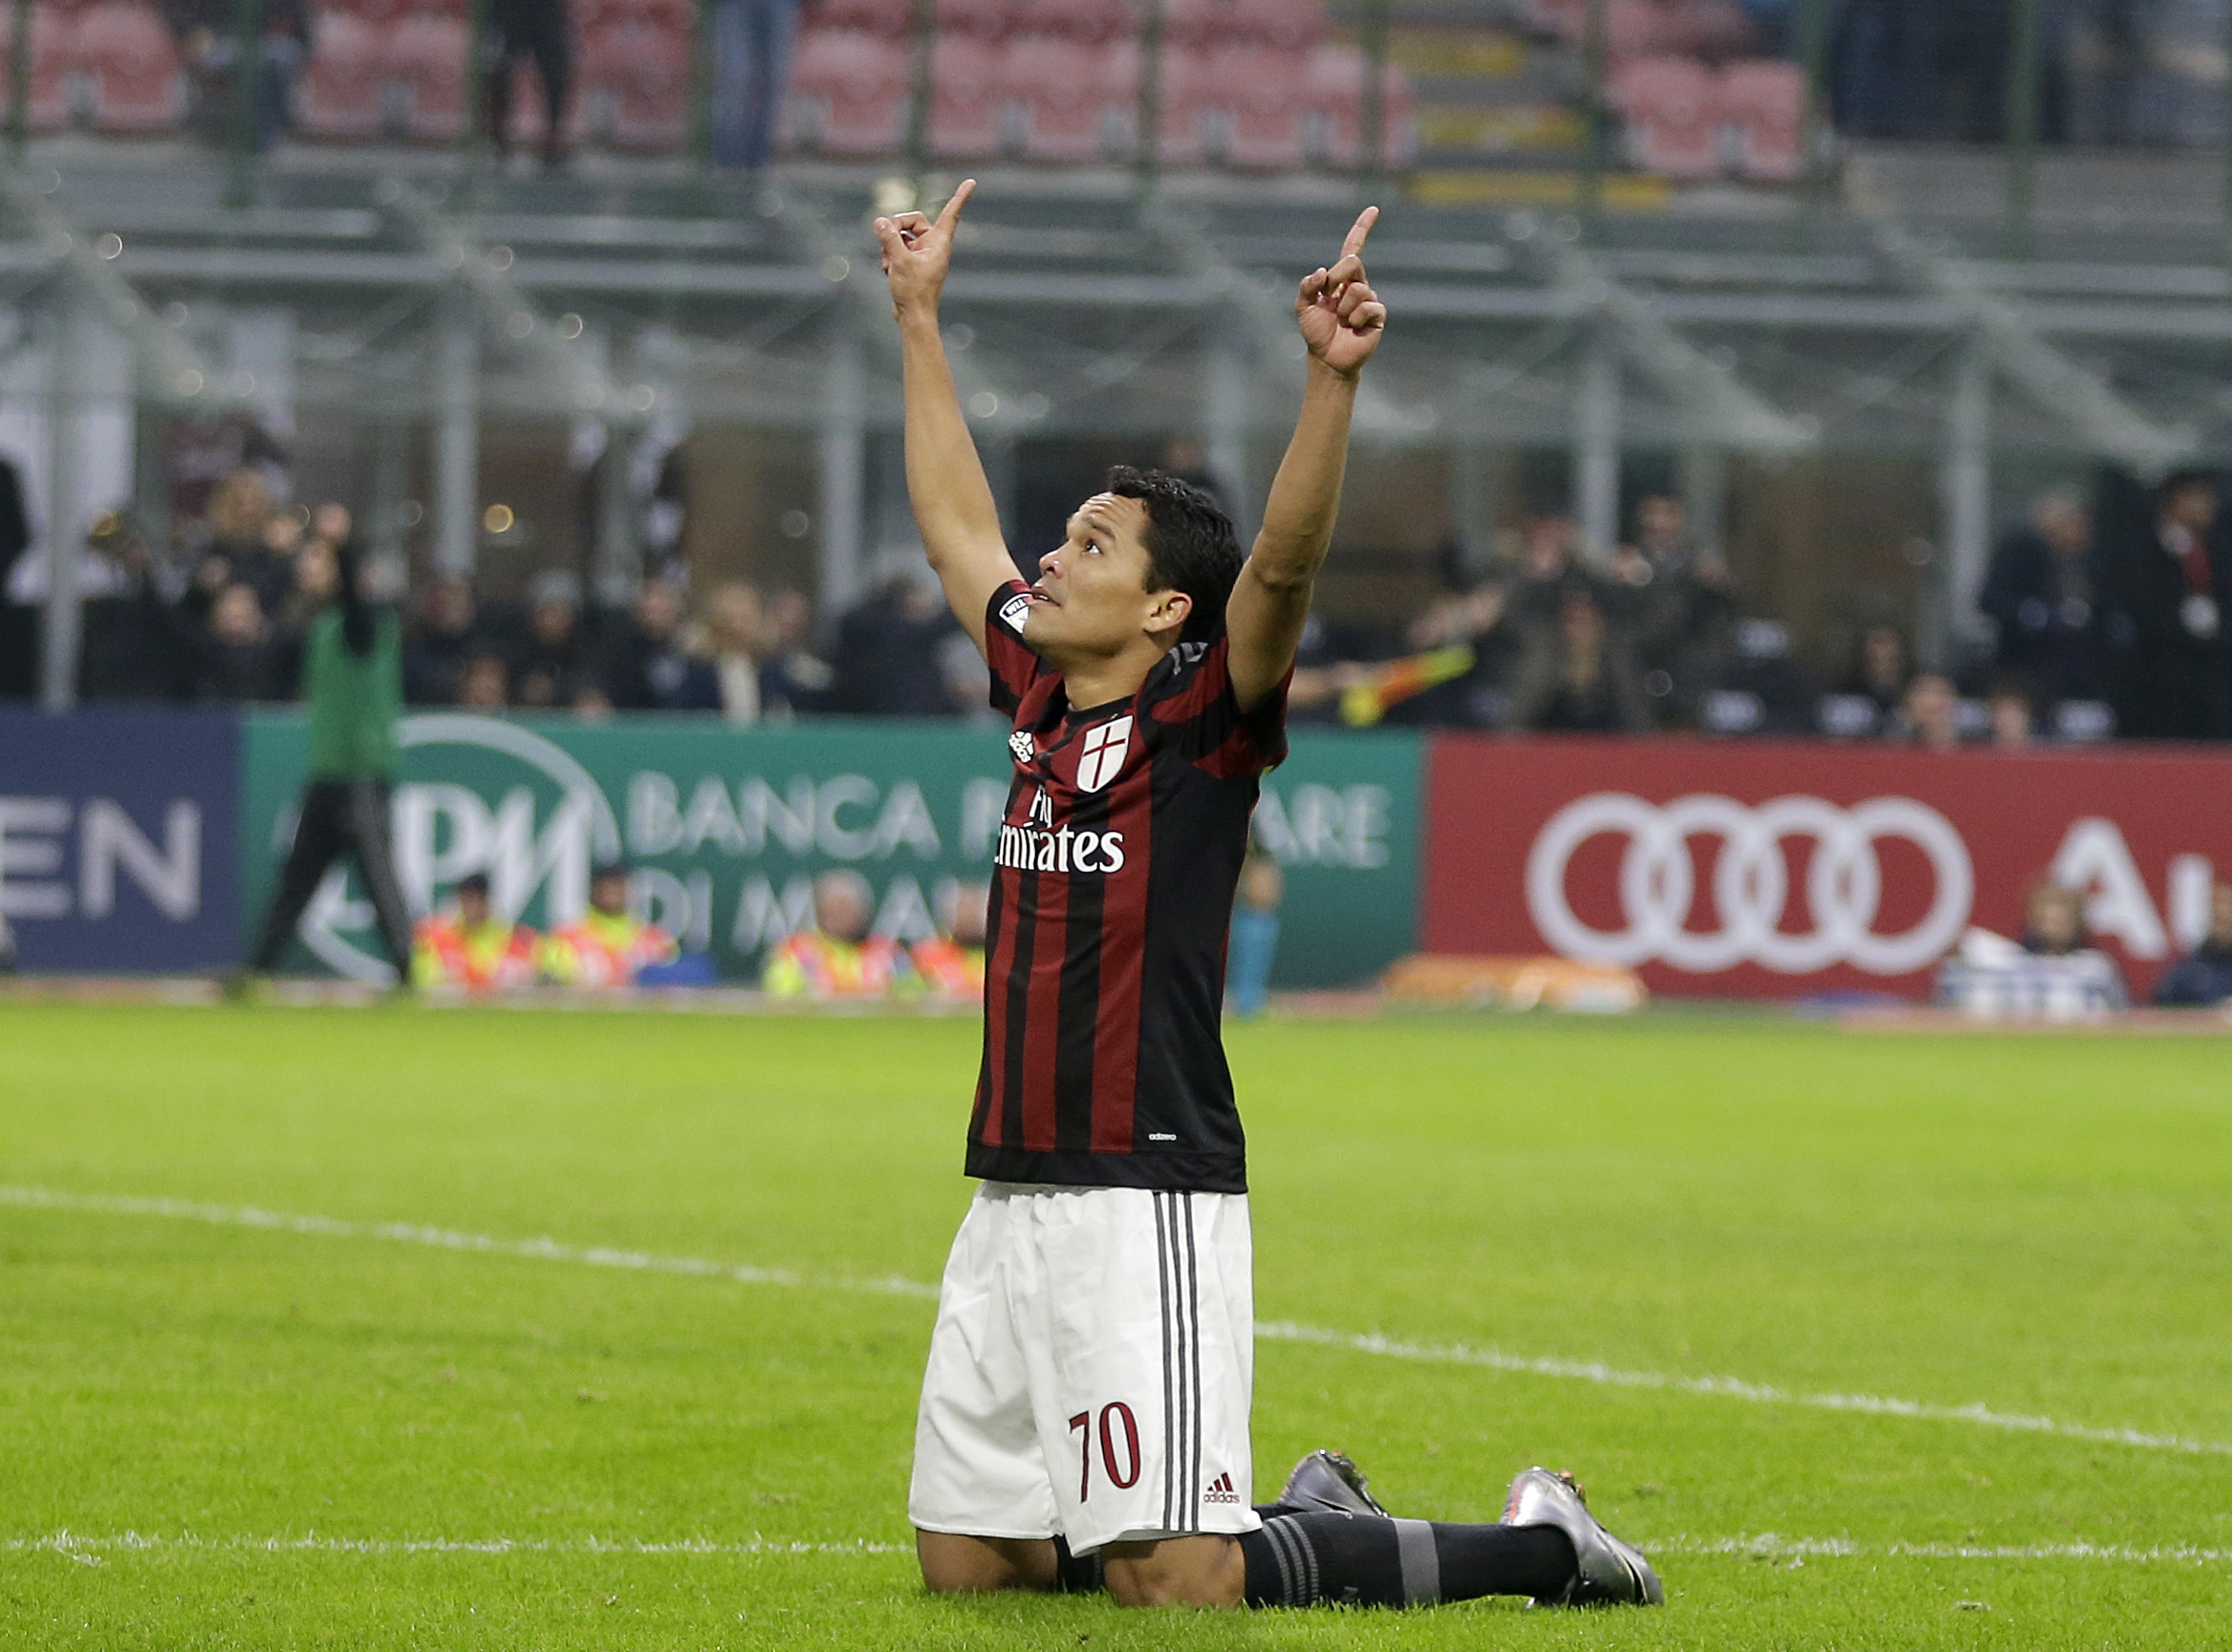 Crotone VS AC Milan ( BETTING TIPS, Match Preview & Expert Analysis )